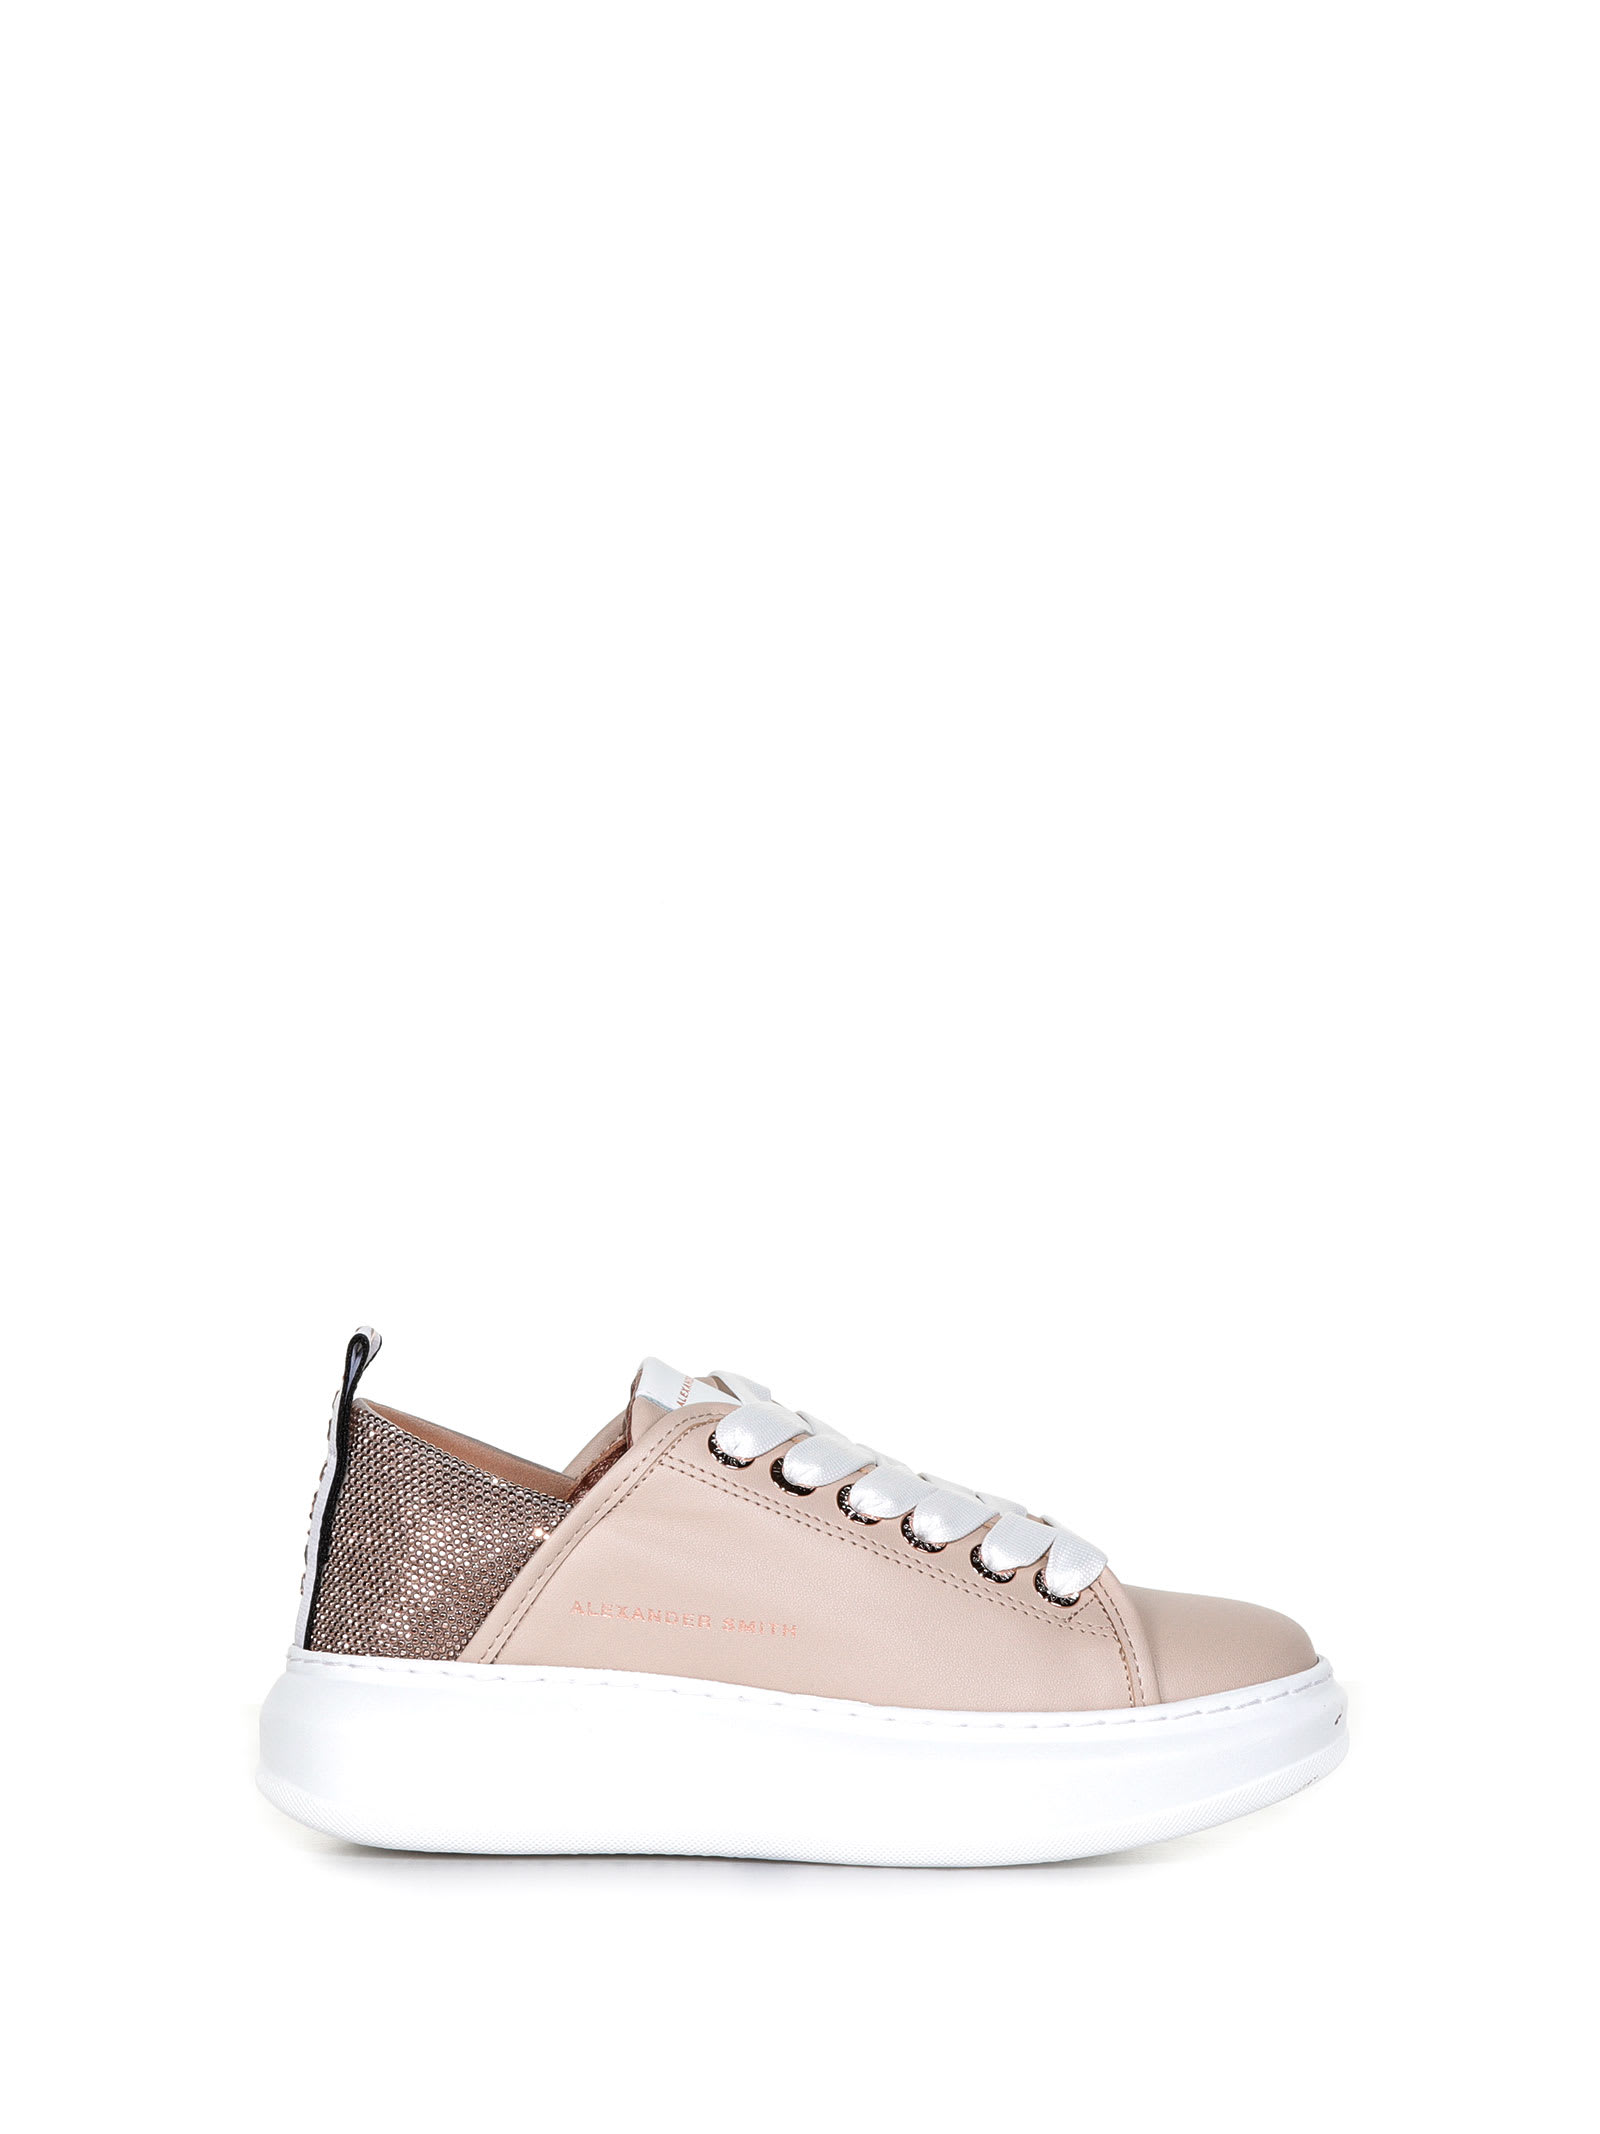 Alexander Smith Leather Sneakers With Micro Studs In Sand